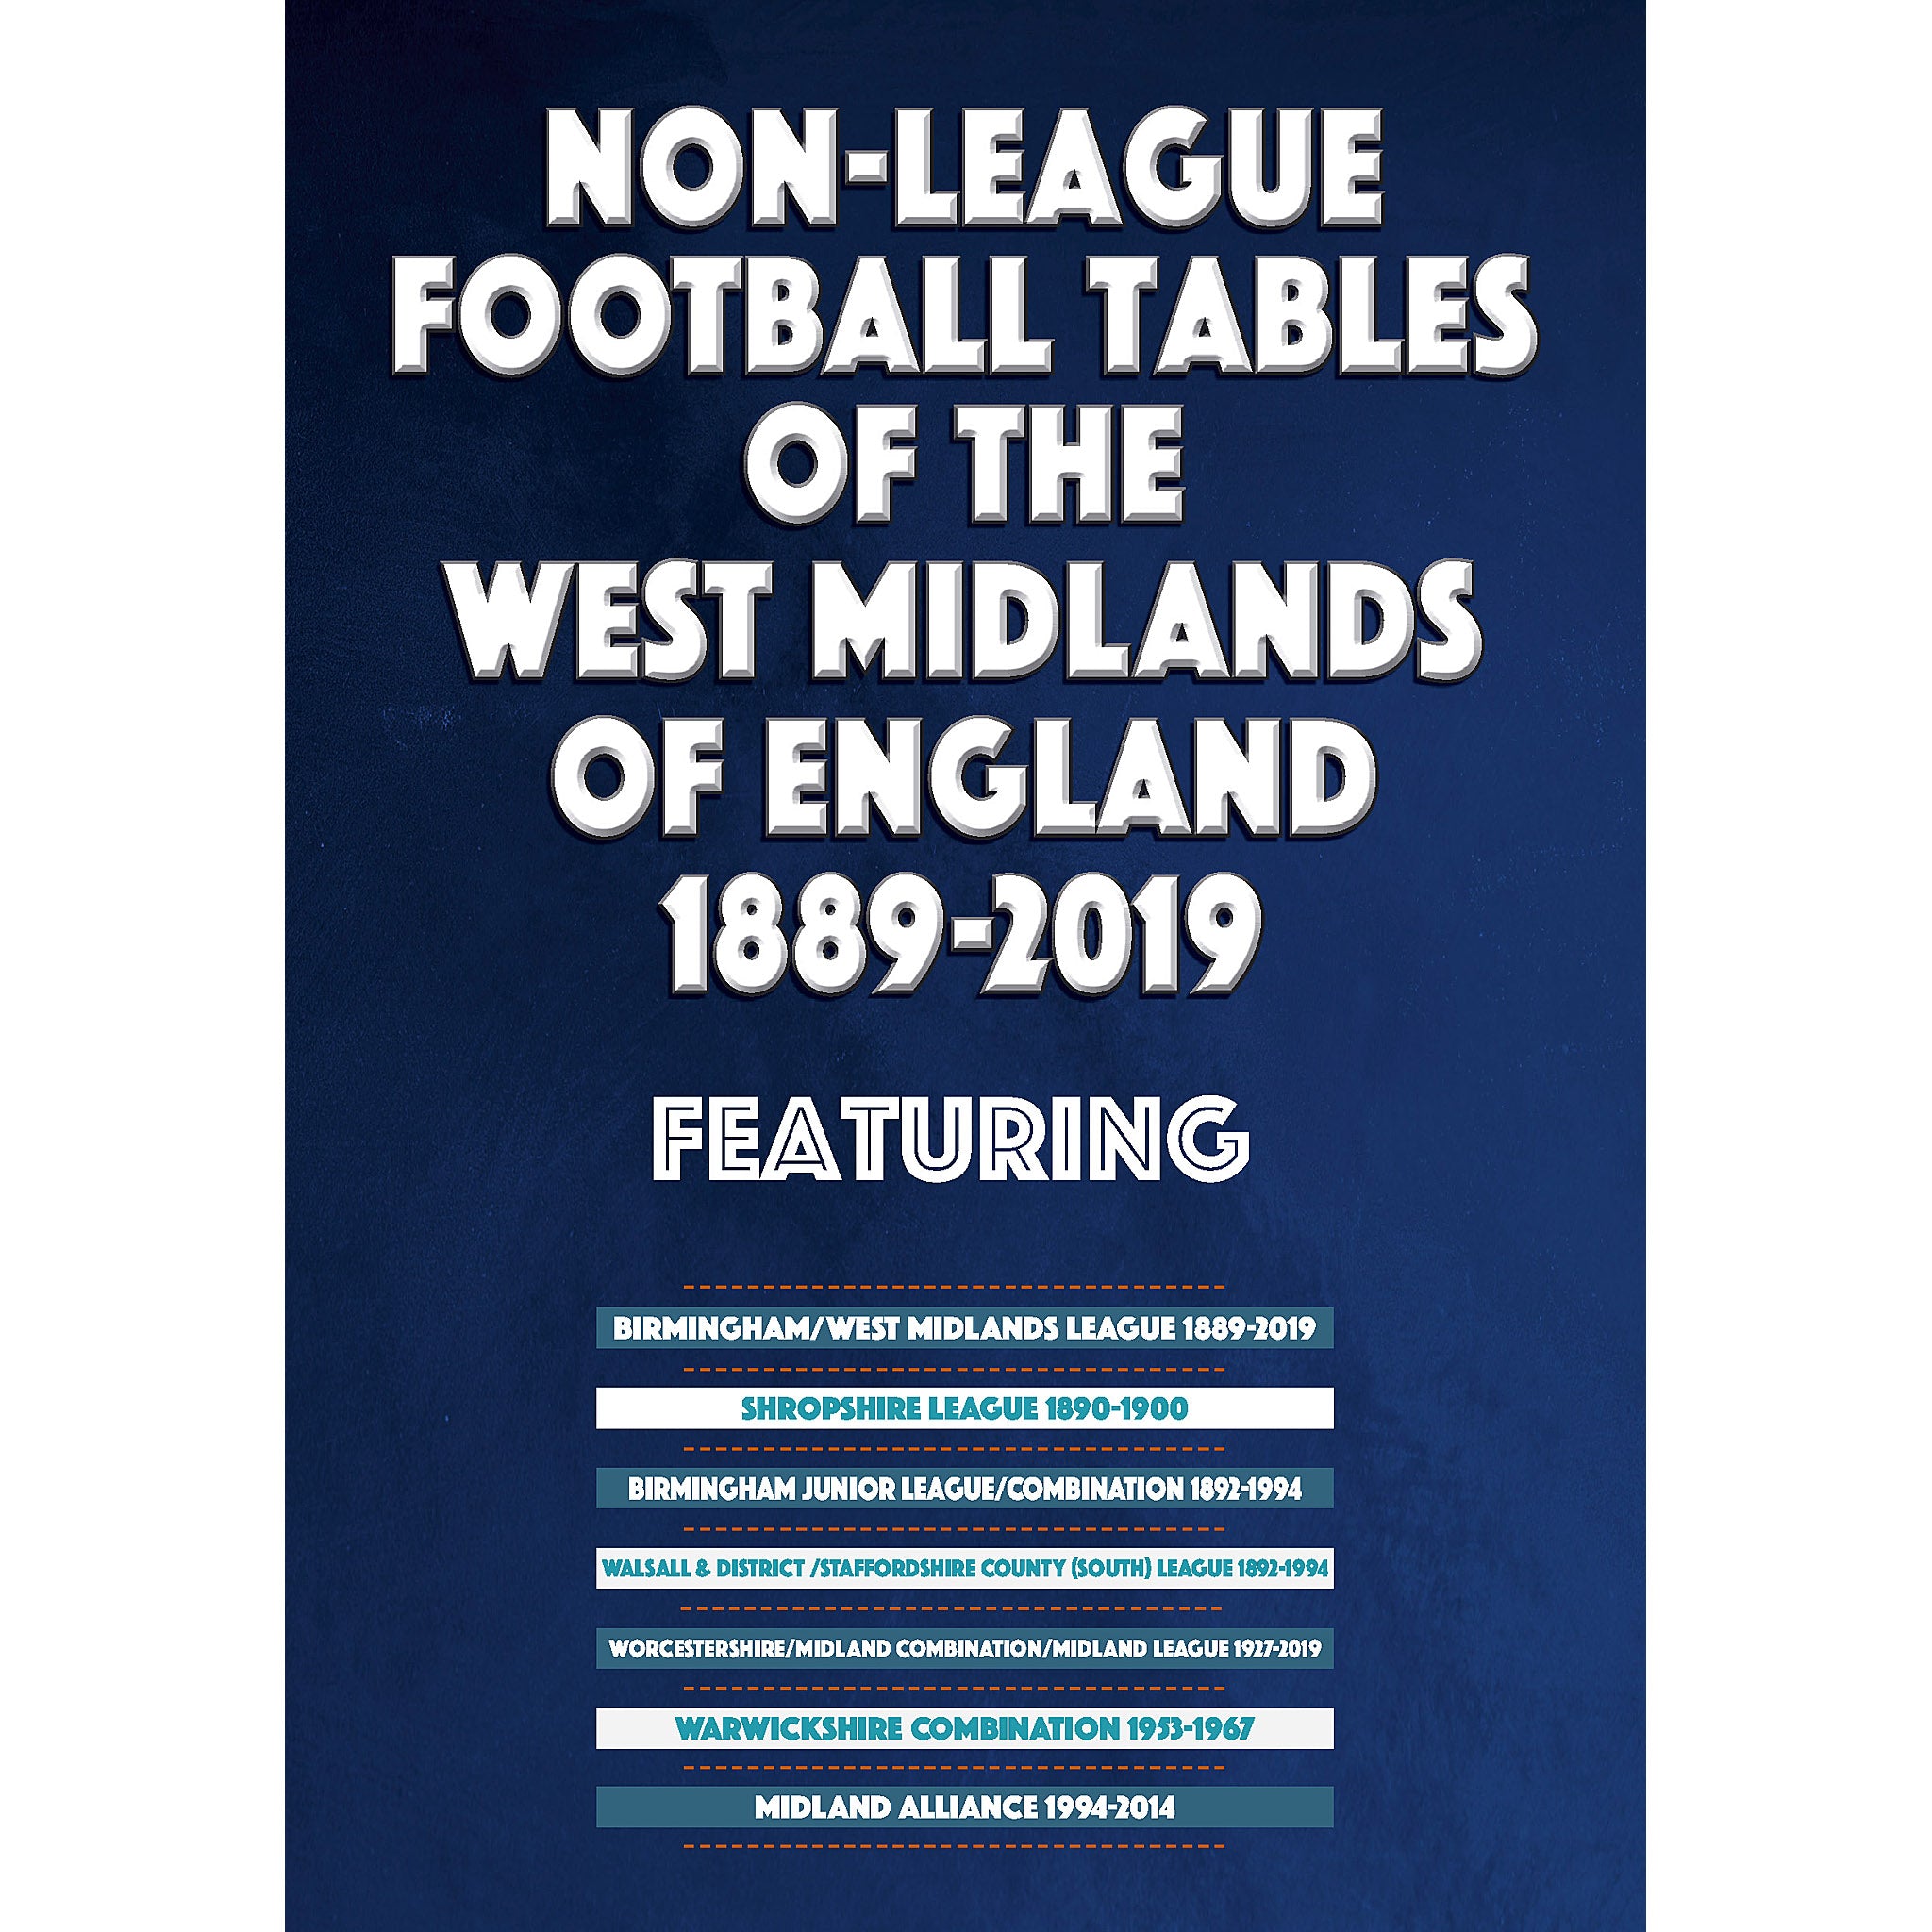 Non-League Football Tables of the West Midlands of England 1889-2019